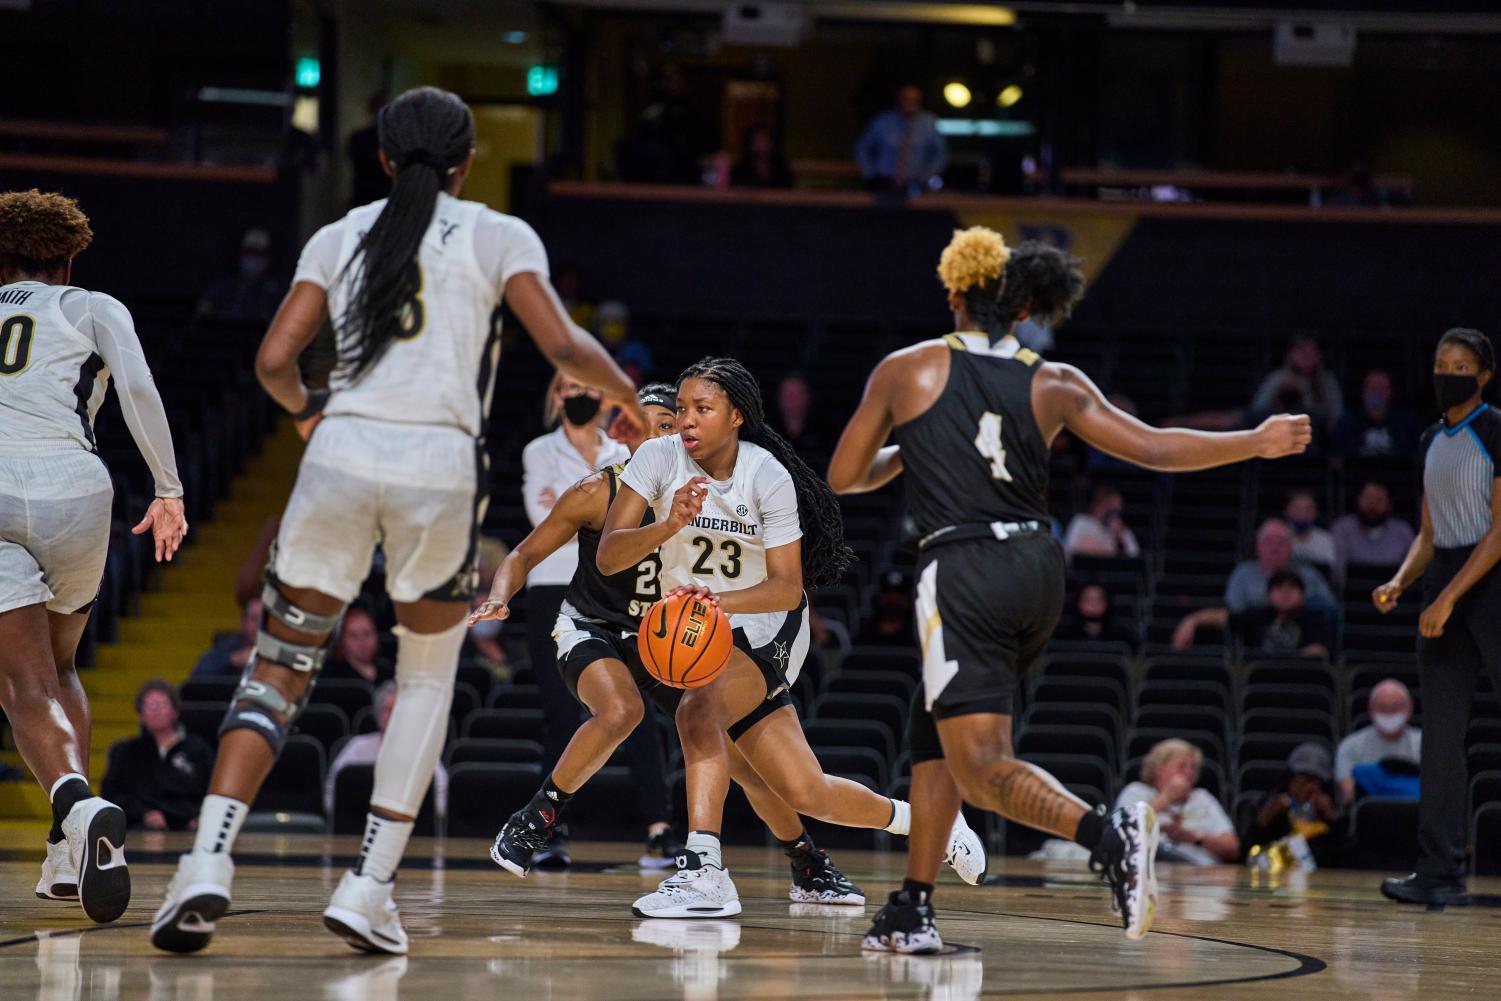 Vanderbilt guard Iyana Moore drives into the paint against Alabama State on Dec. 28, 2021.